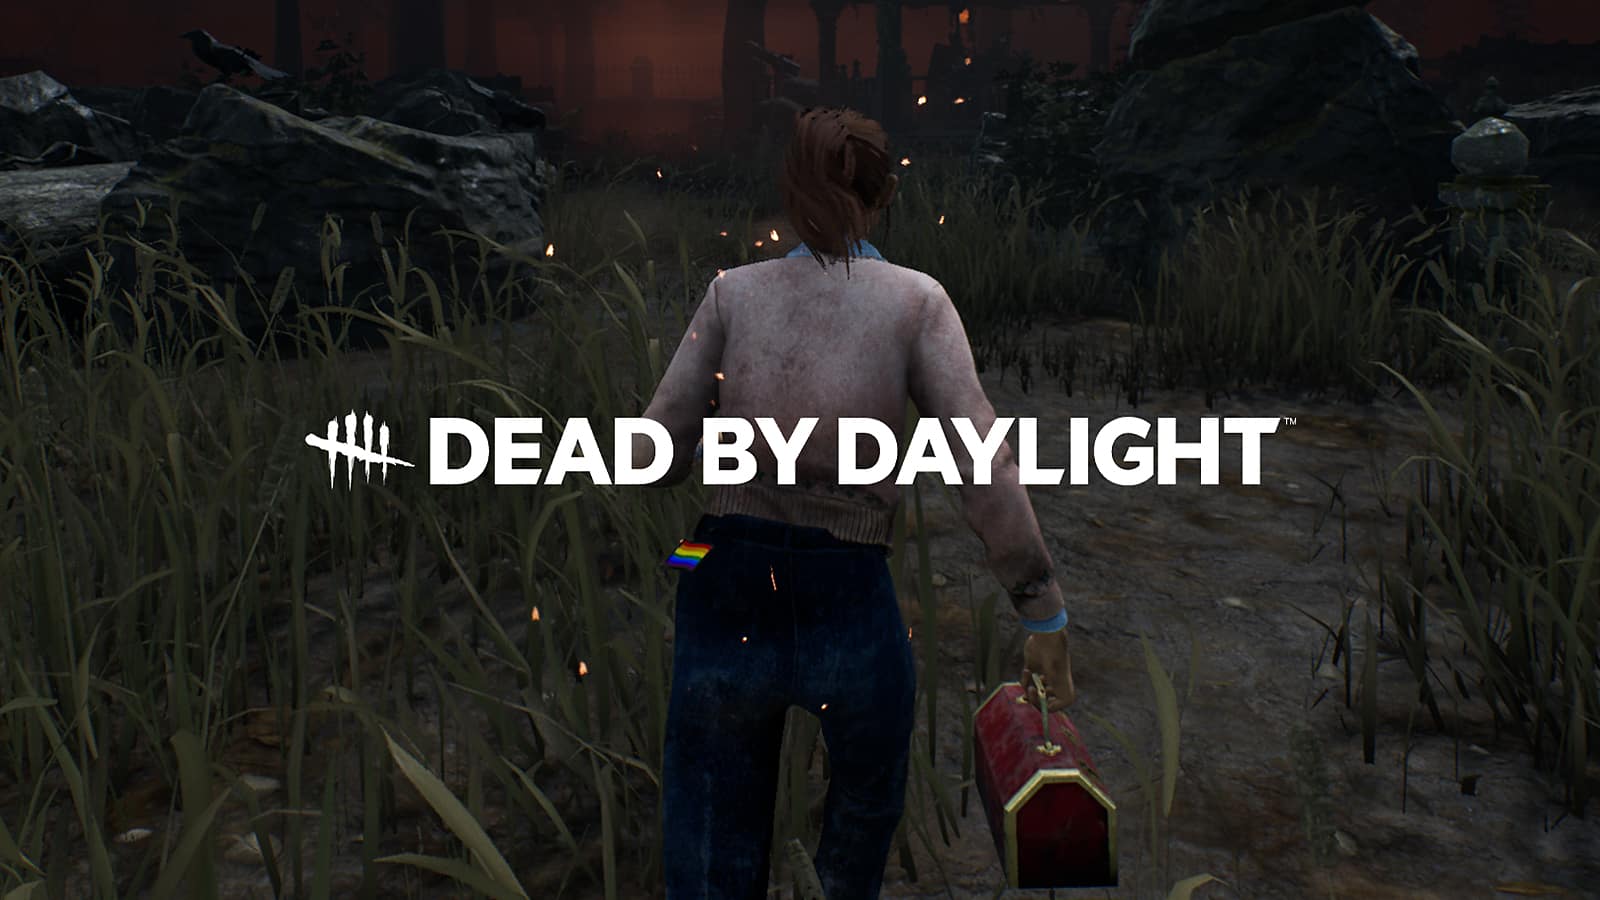 Nancy running in Dead by Daylight with the logo